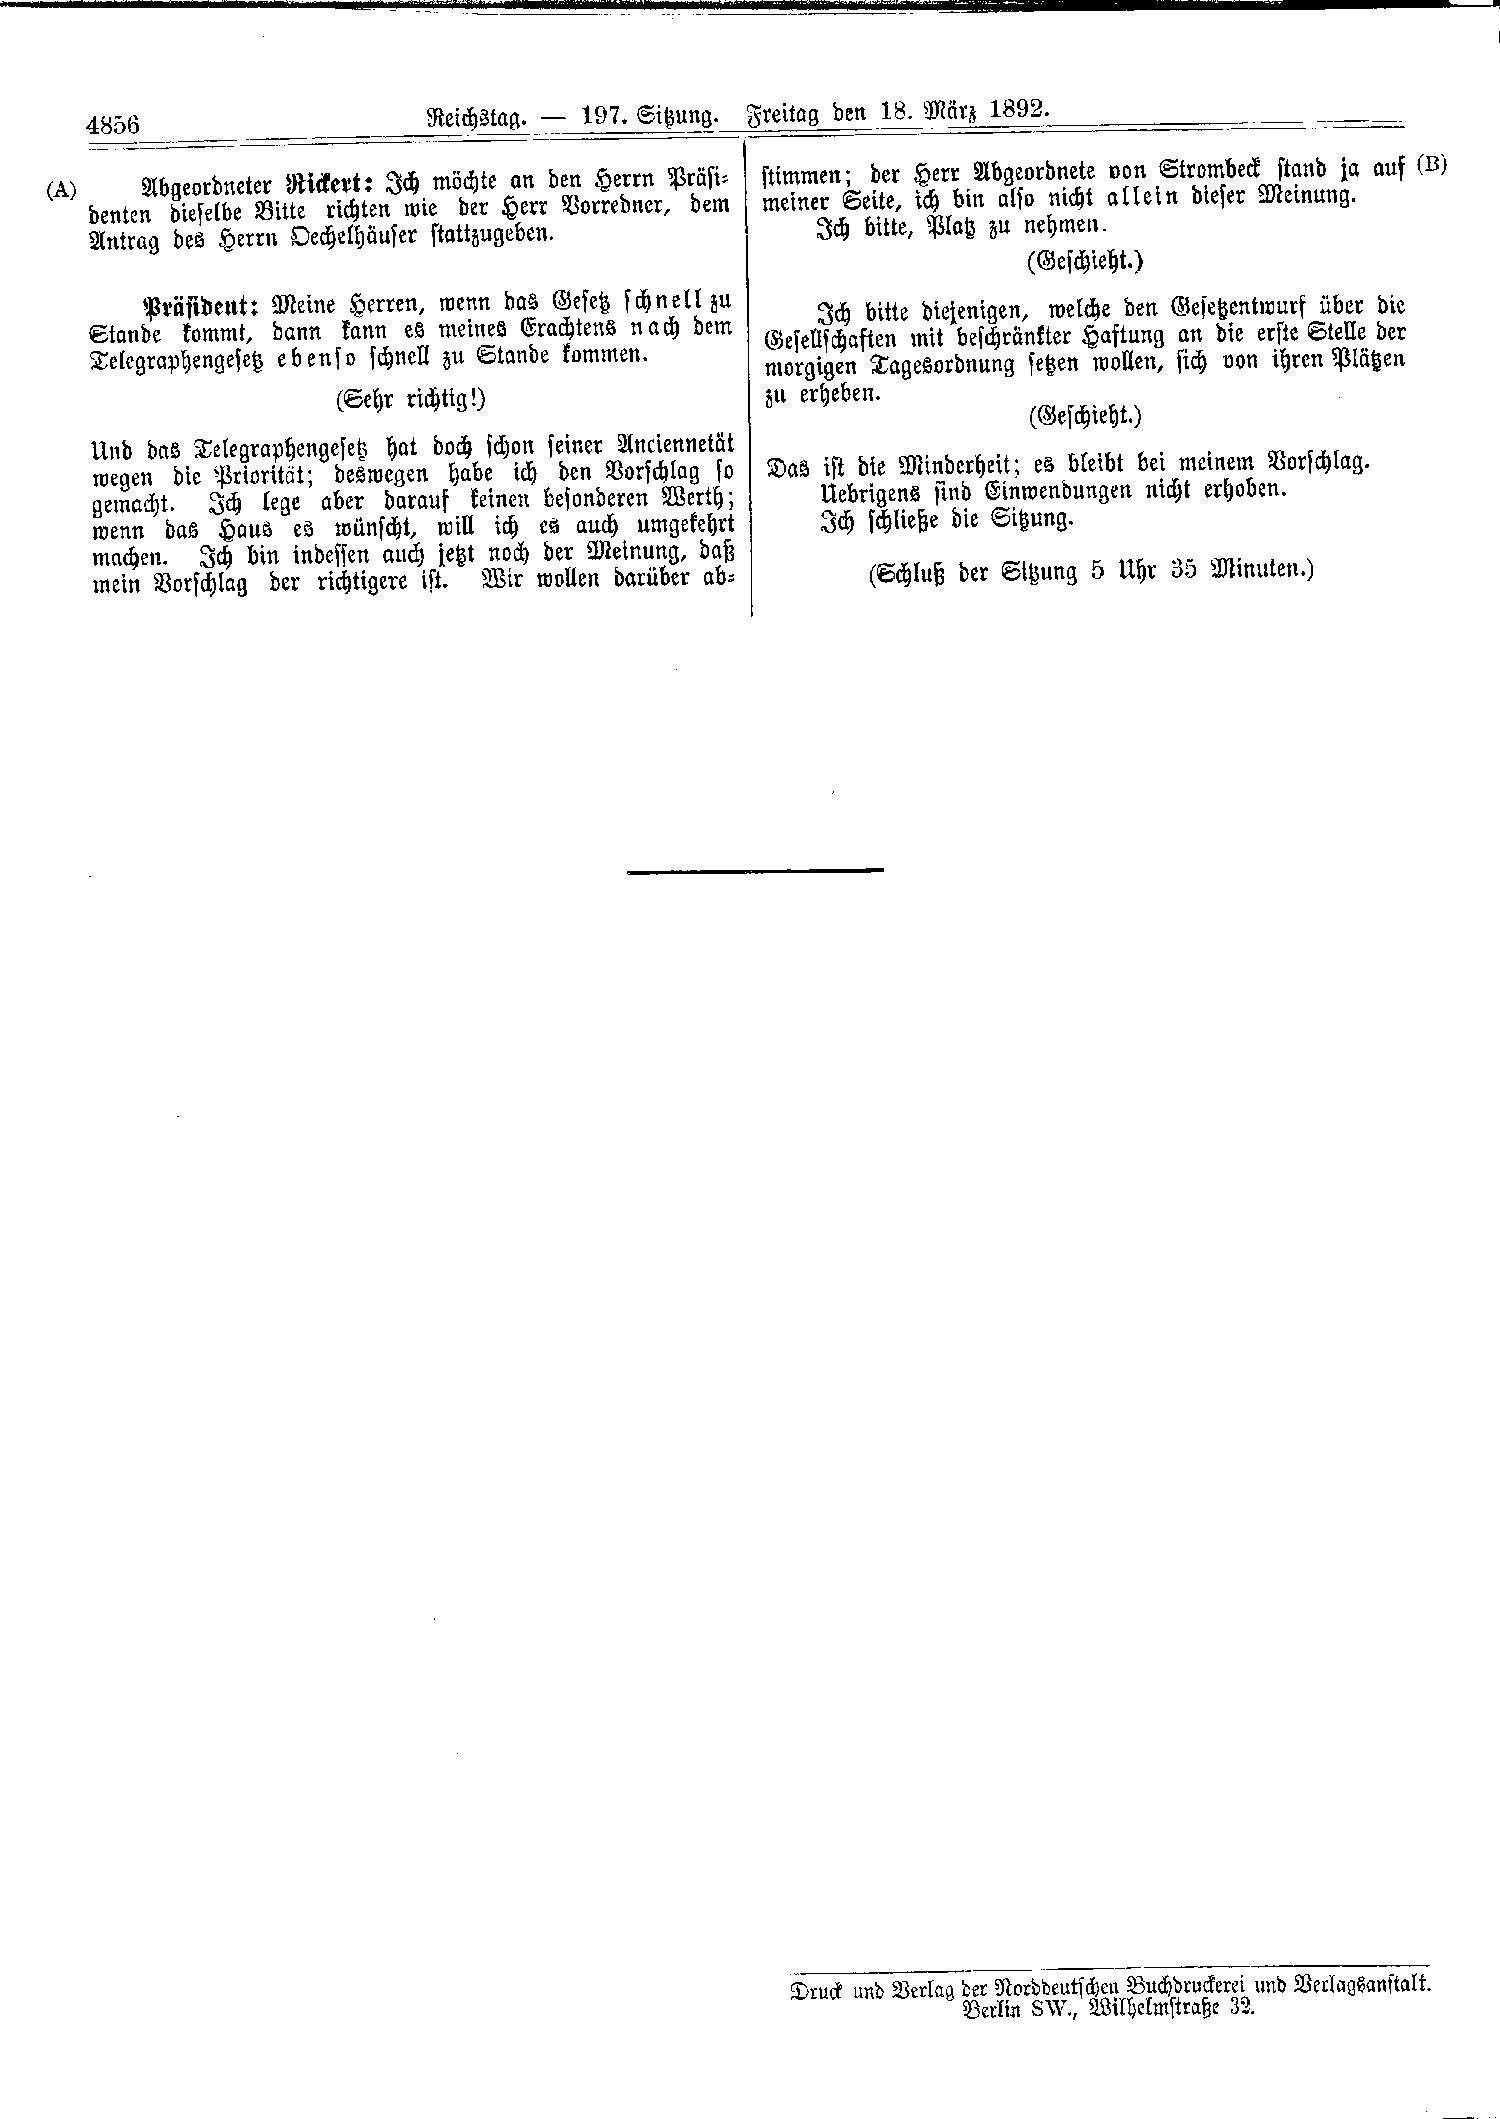 Scan of page 4856